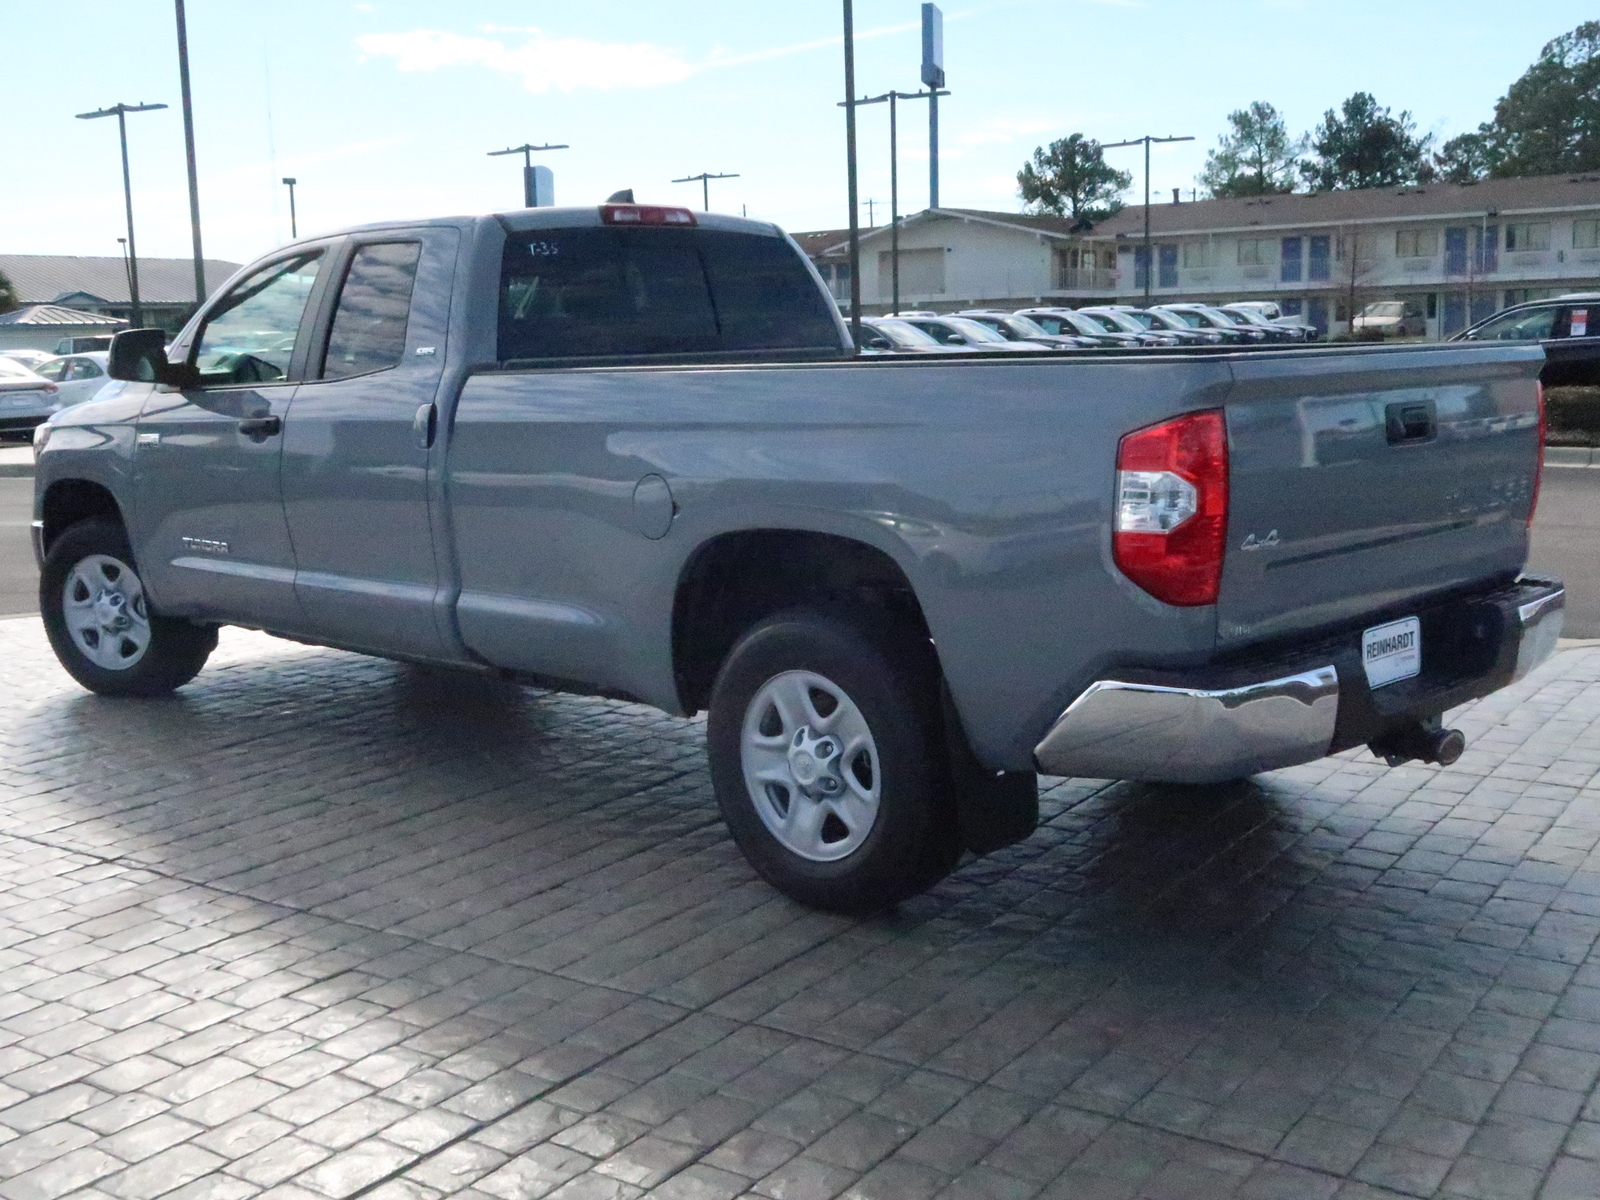 New 2020 Toyota Tundra SR5 Double Cab 8.1′ Bed 5.7L (Natl) 4WD